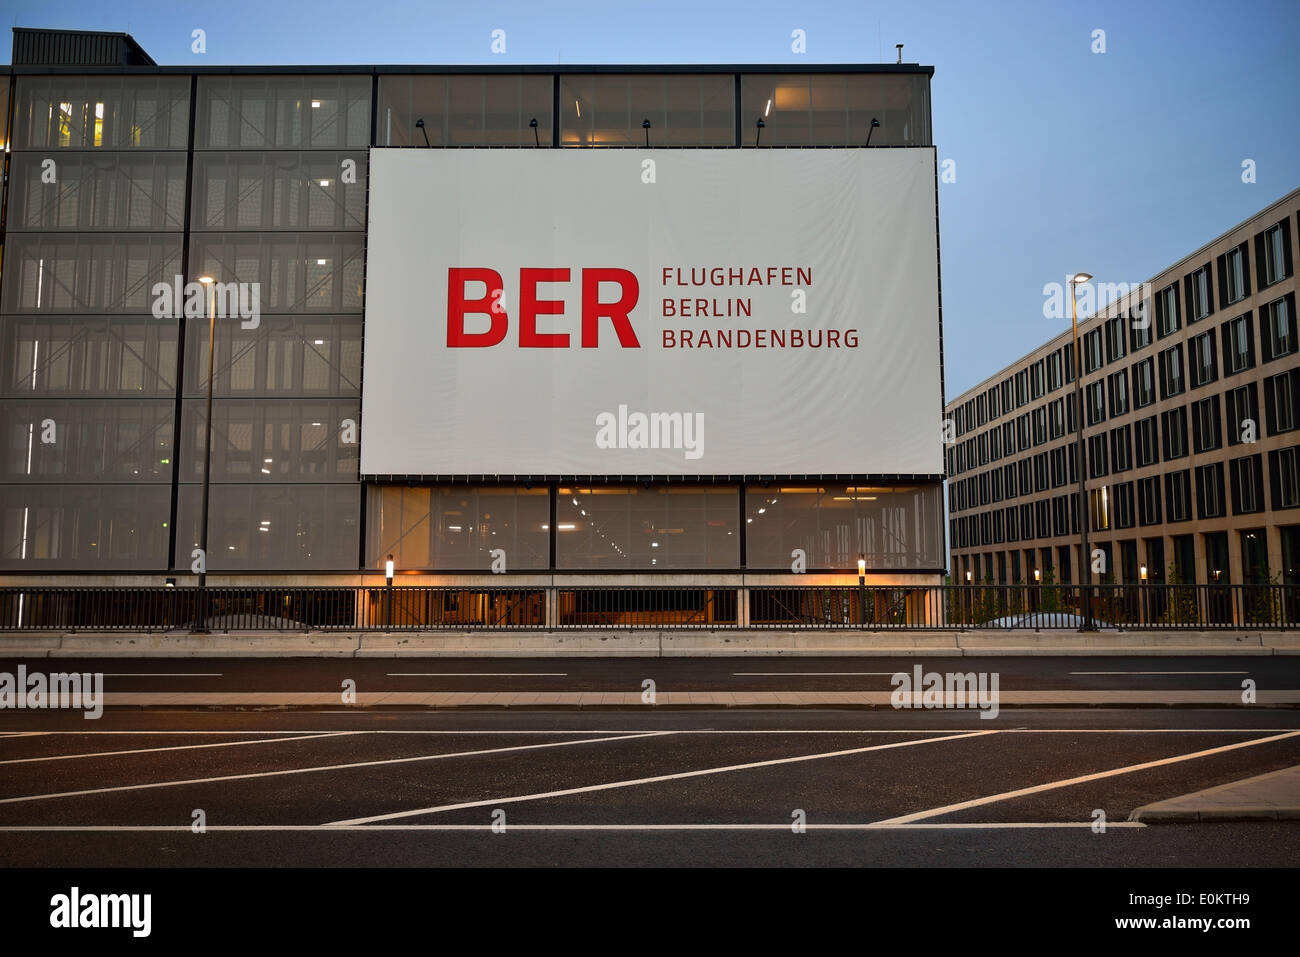 Berlin Brandenburg Airport (IATA: BER) is the new international airport of Berlin, capital of Germany. Originally planned to be opened in 2010, the airport has encountered a series of delays due to poor construction planning, management and execution. - 21 Stock Photo